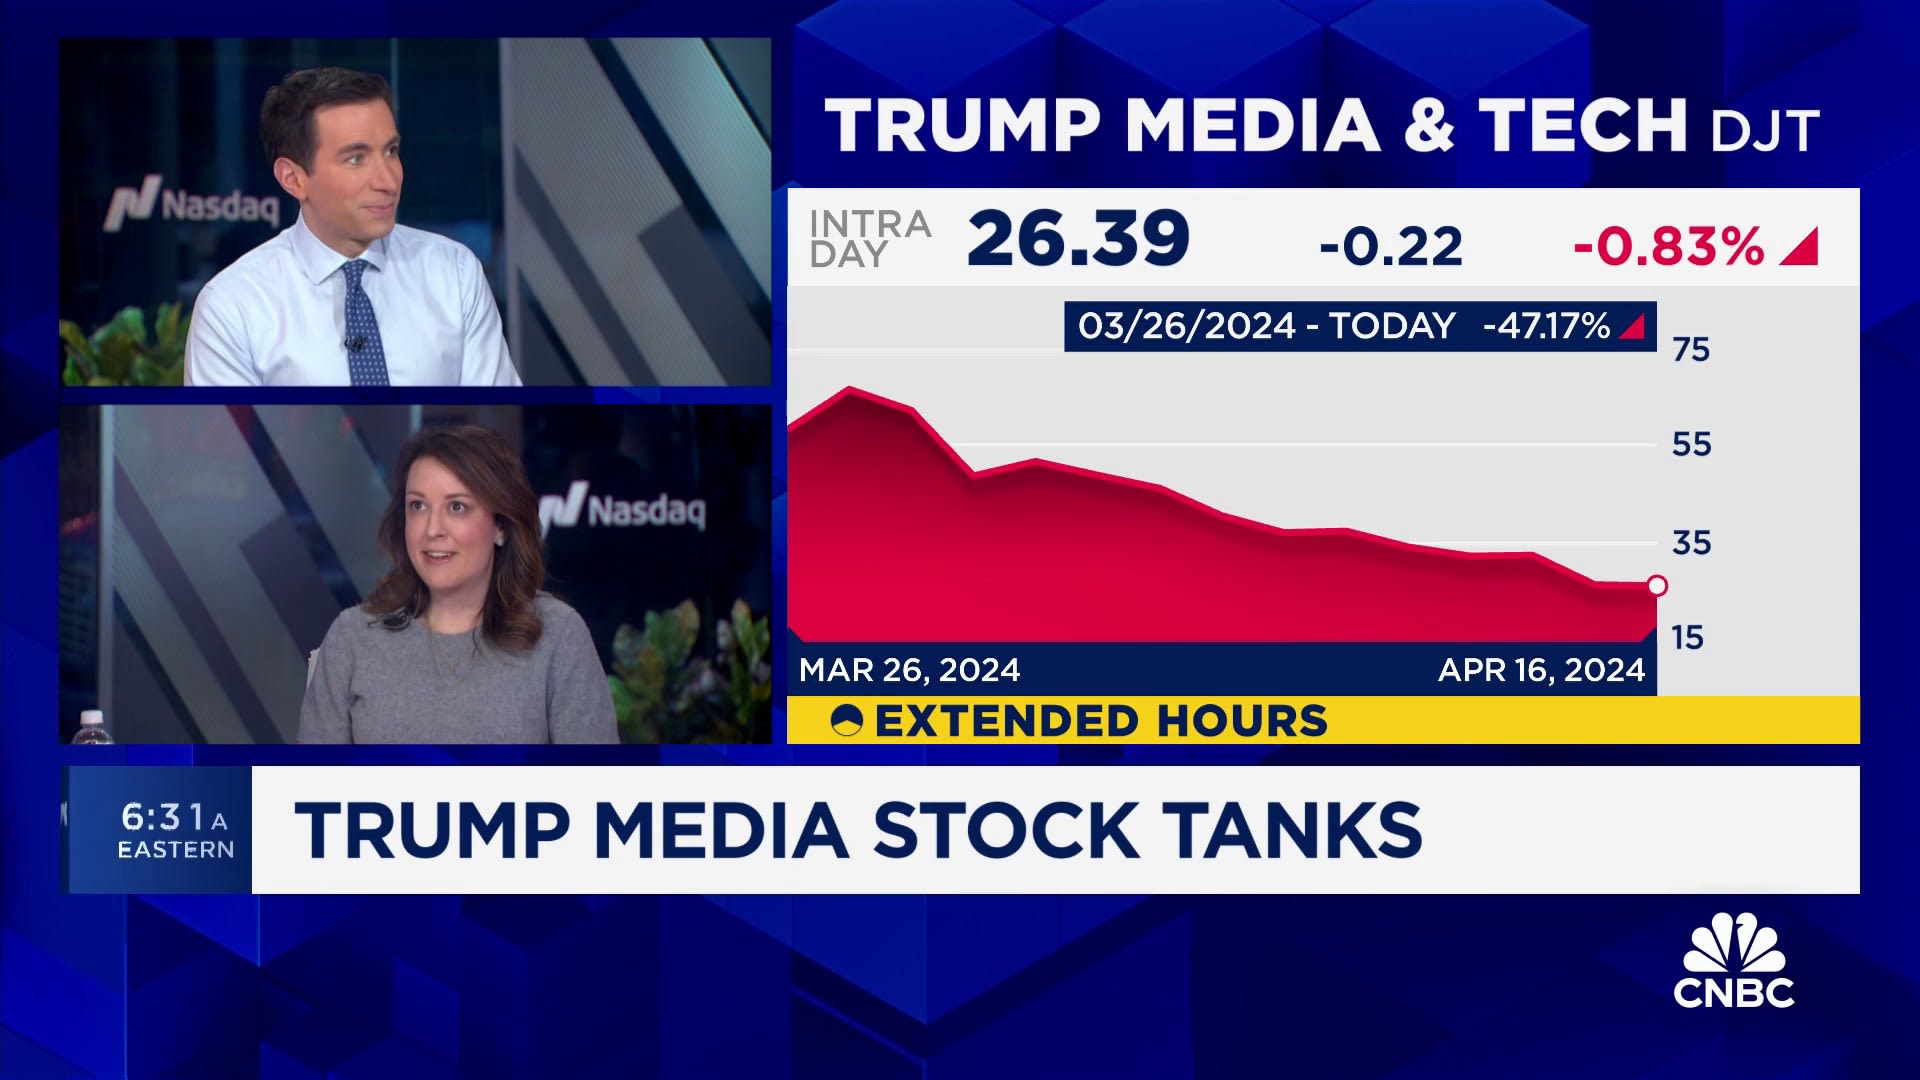 Trump Media stock tanks: Here's what investors need to know